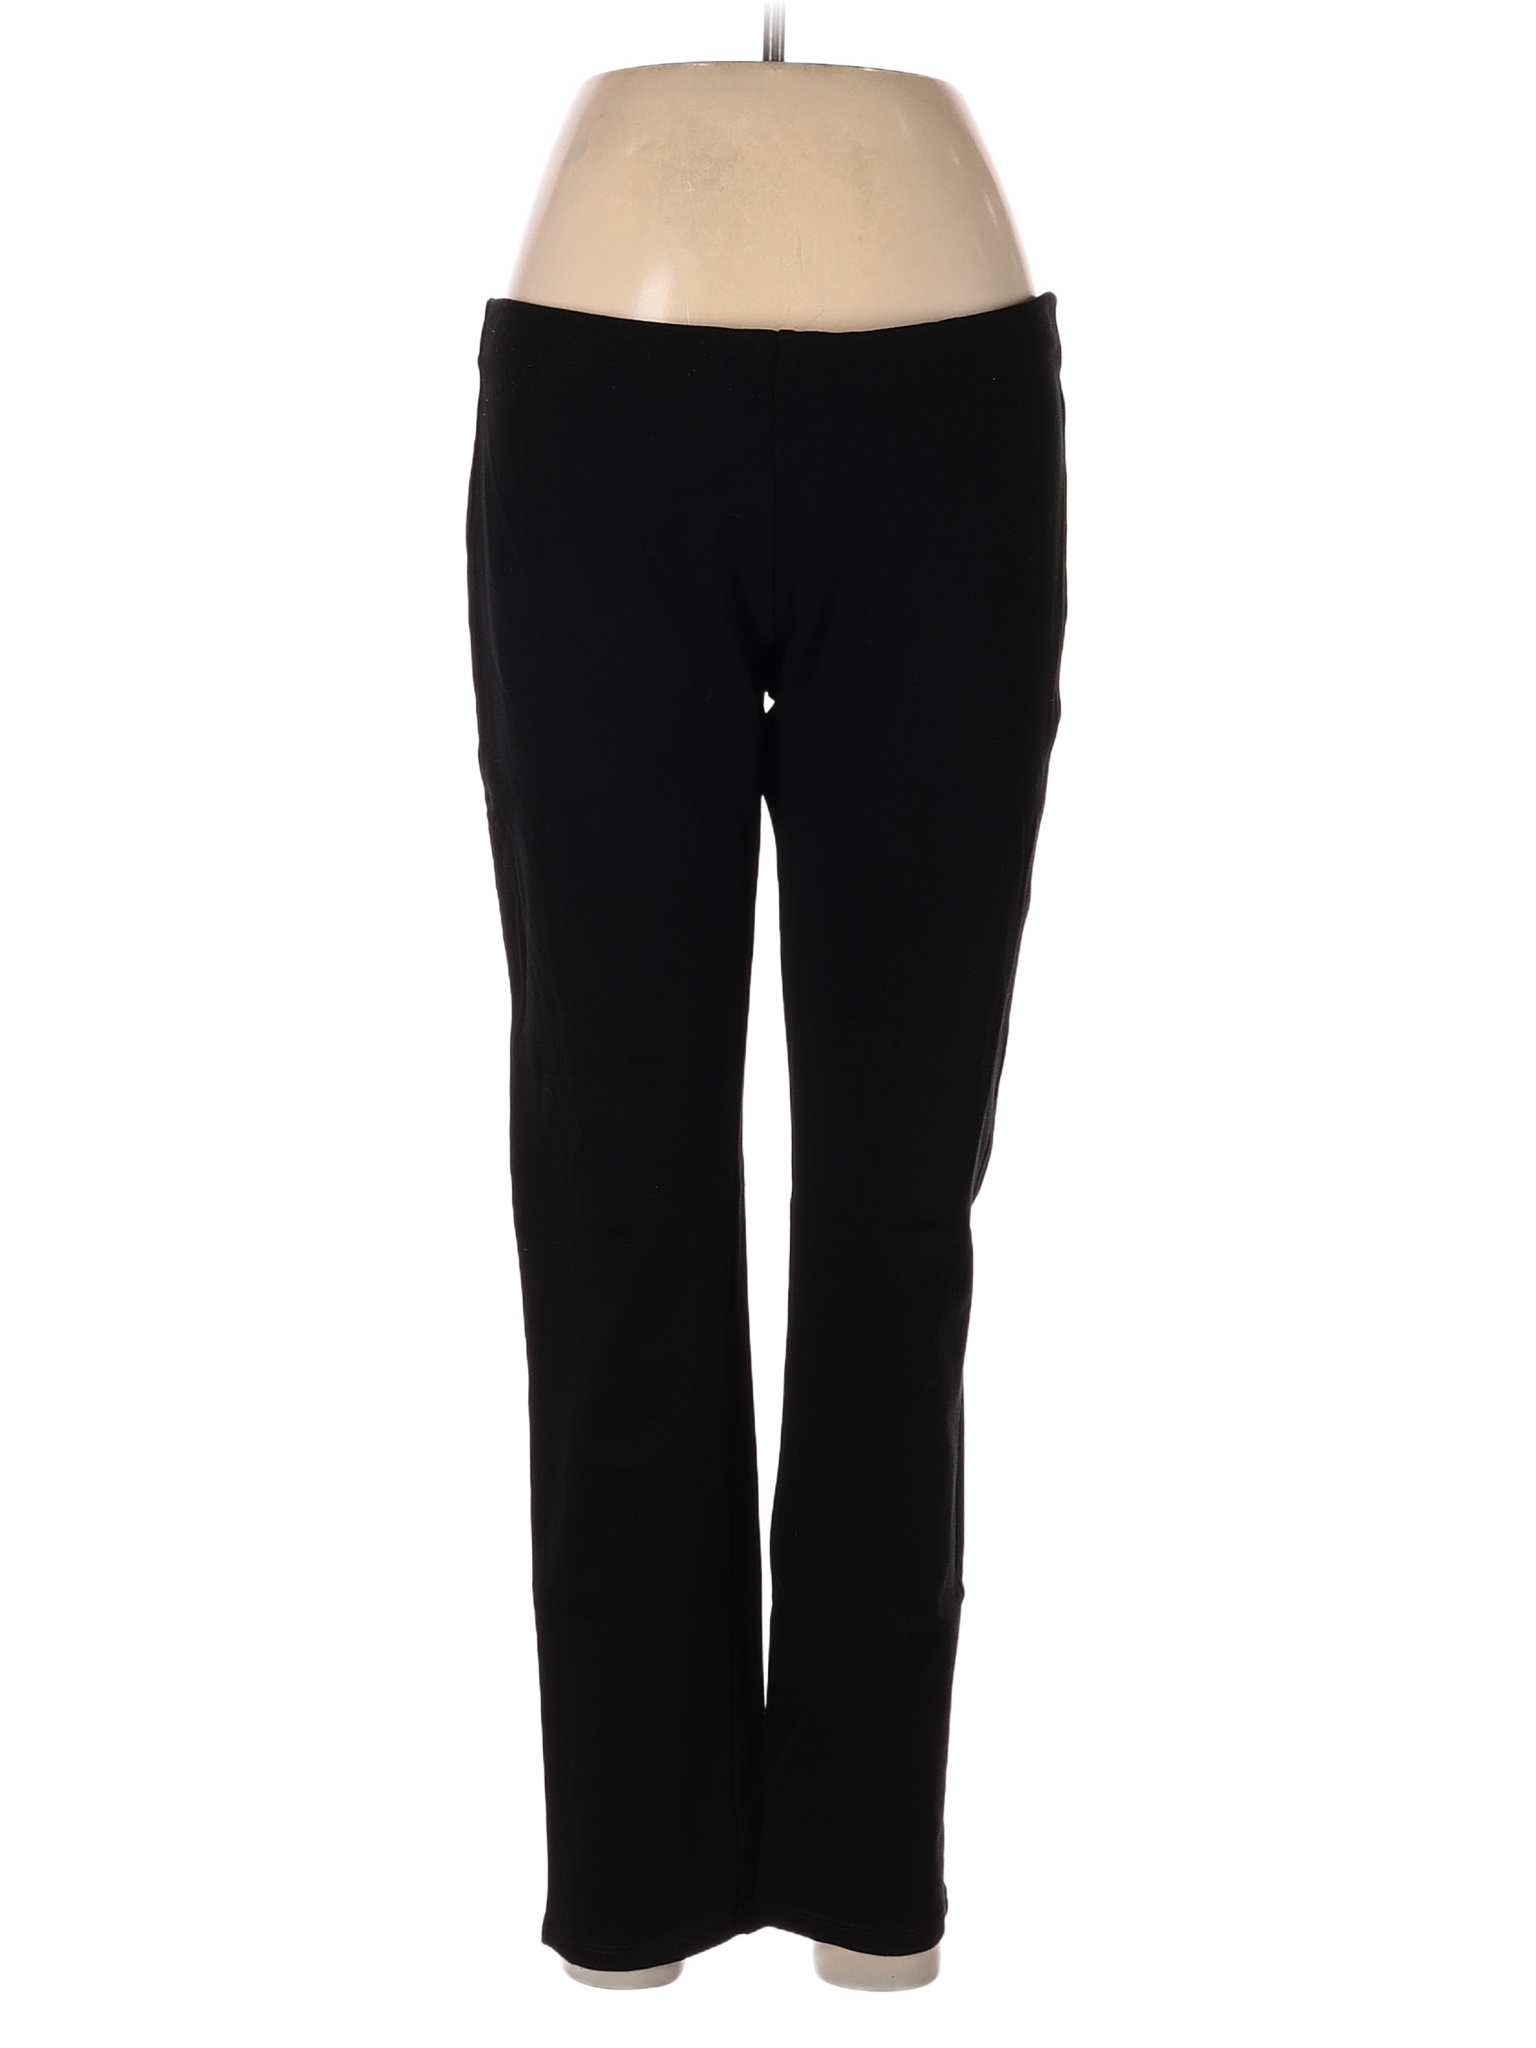 Eileen Fisher Solid Black Casual Pants Size M (Petite) - 79% off | thredUP